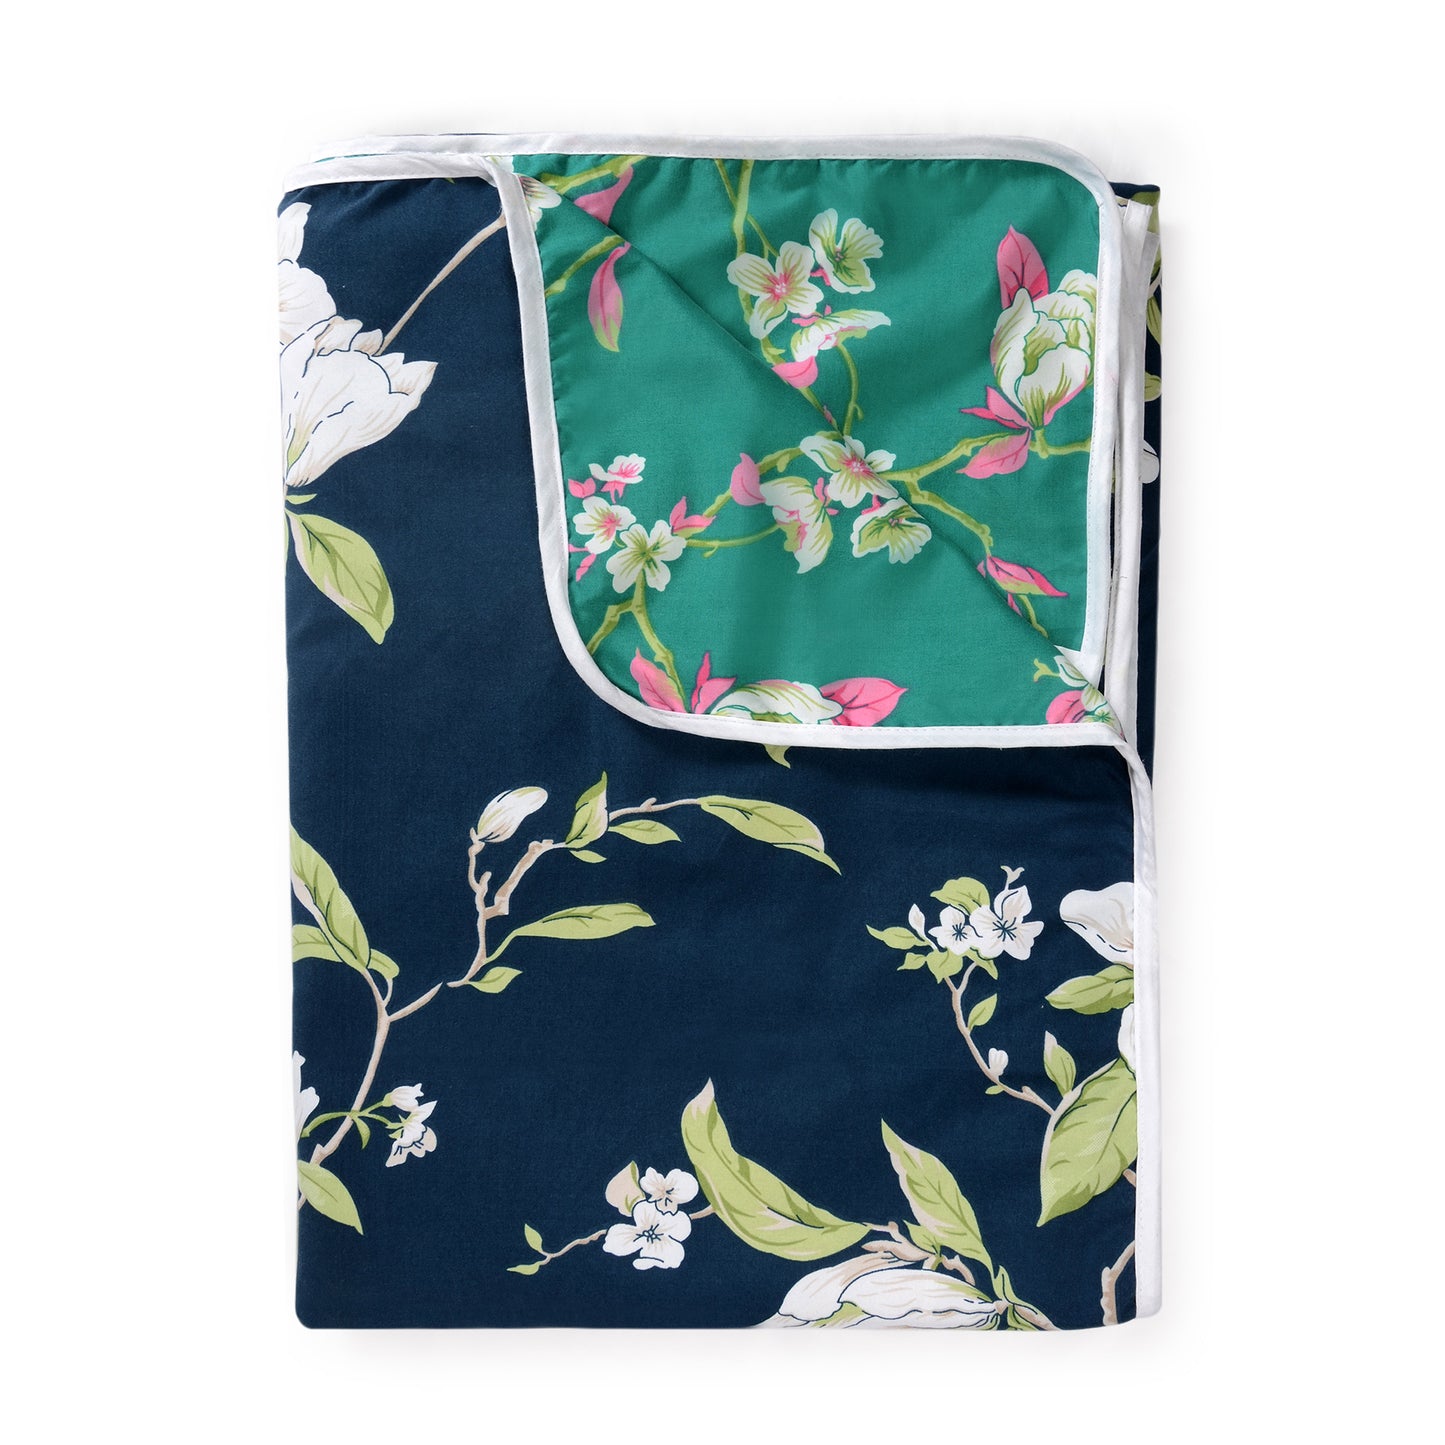 Blue and Dark Green Floral Microfiber Dohar Combo For Double Bed